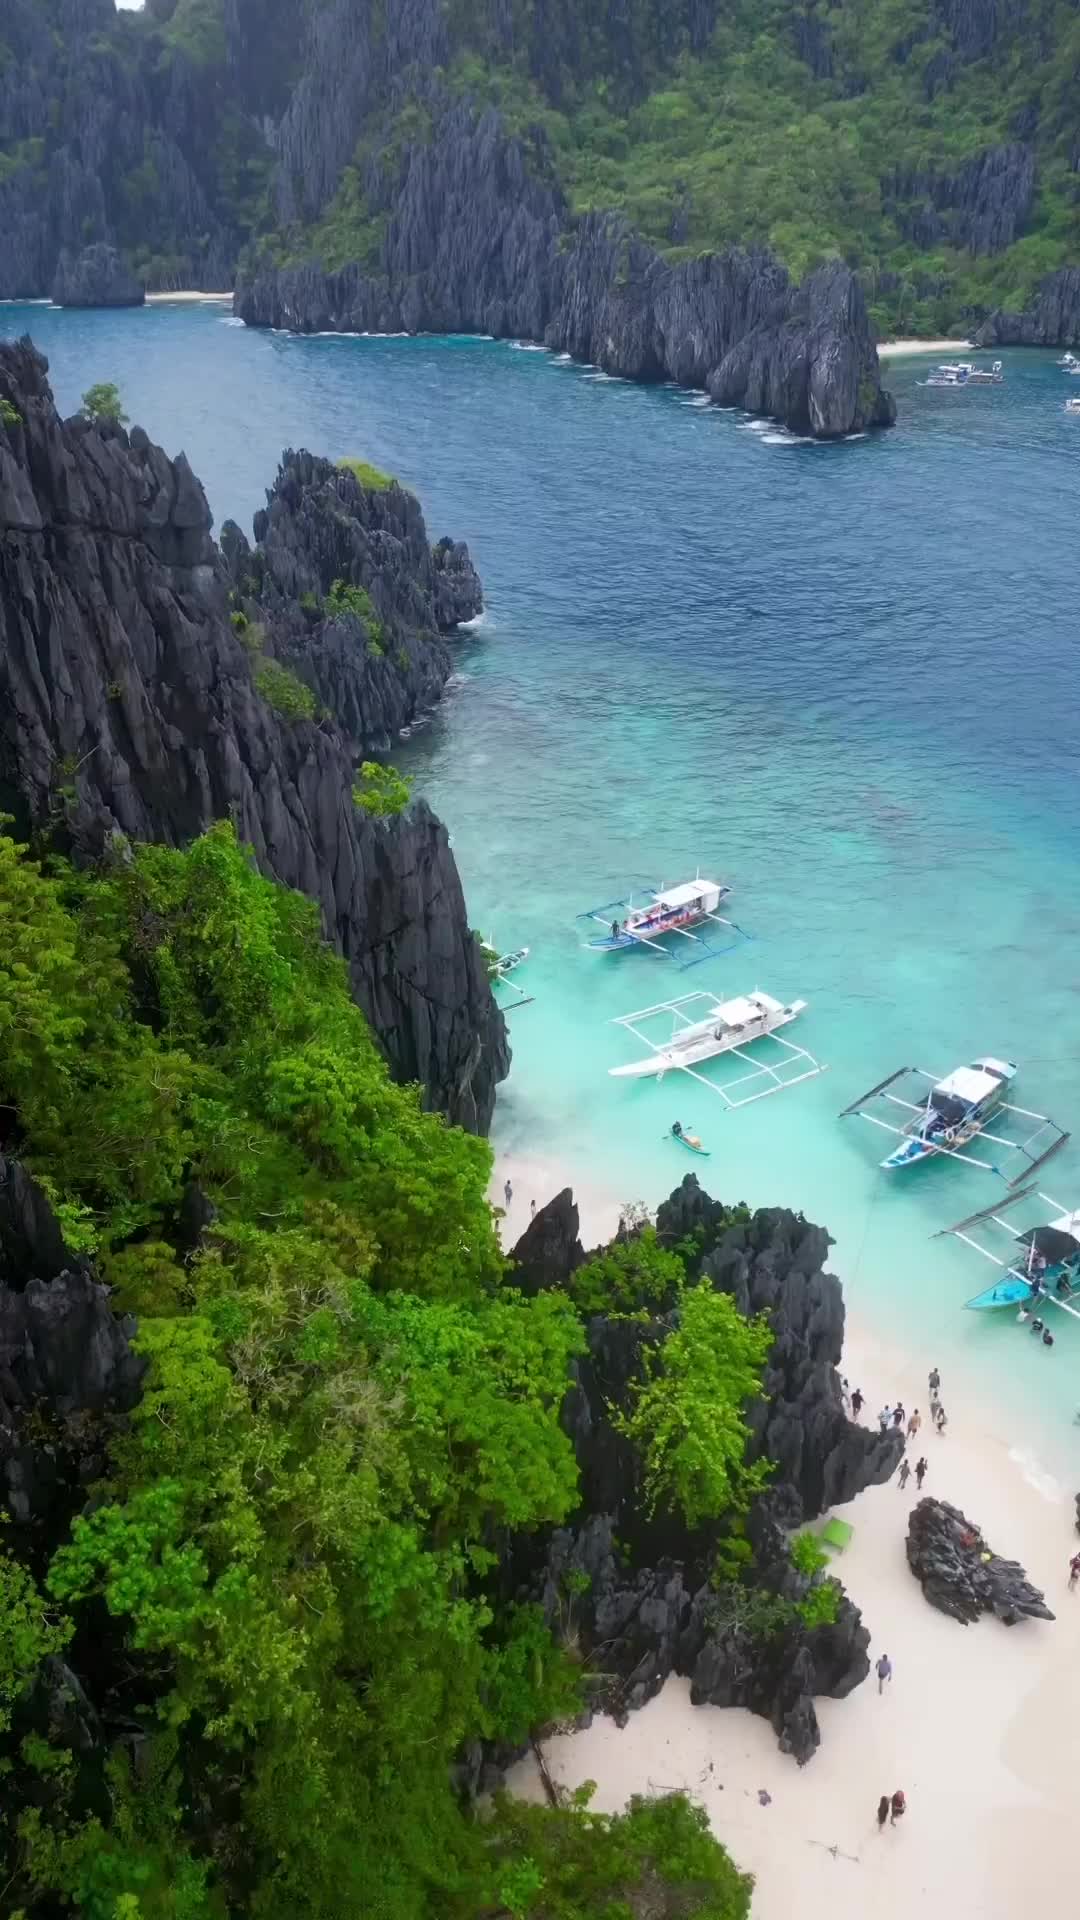 Summer Vibes in El Nido, Philippines 🌊☀️